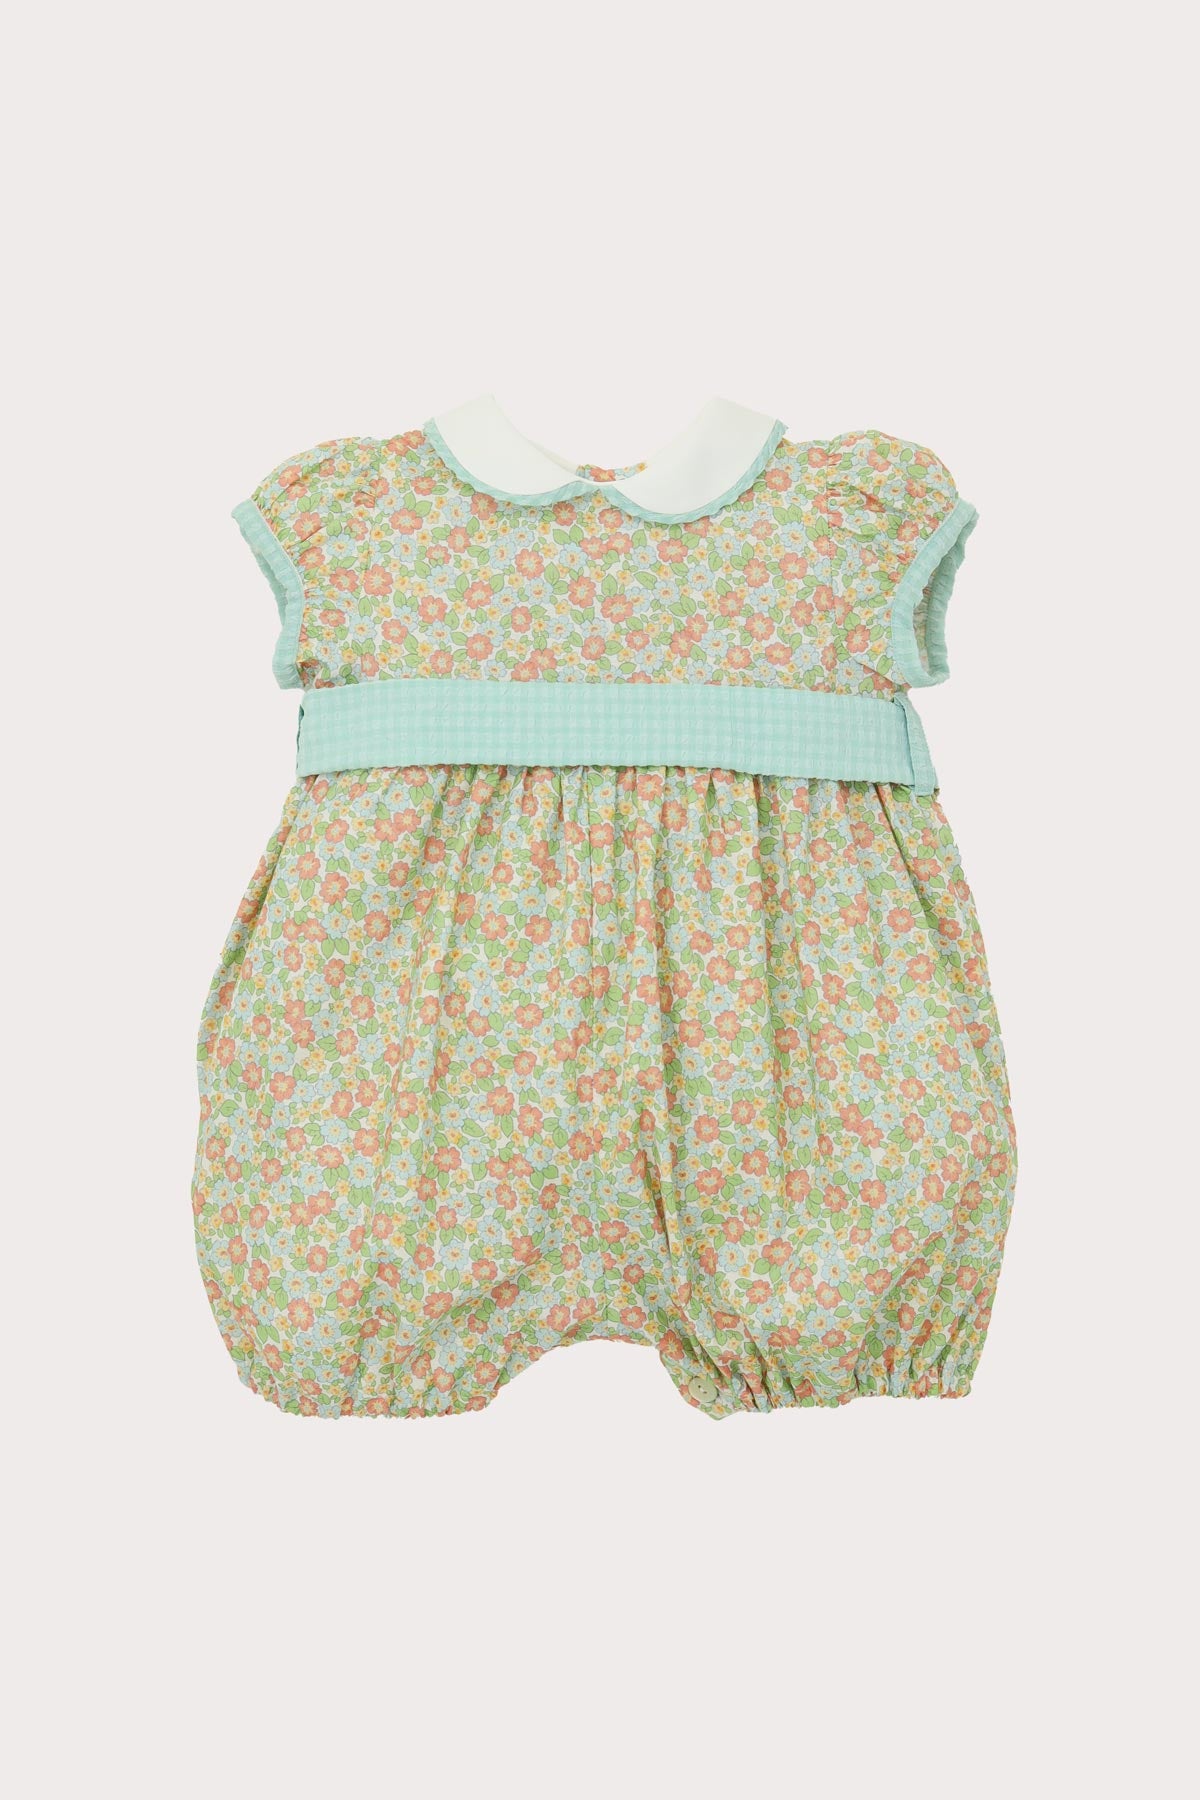 floral classic baby girl romper